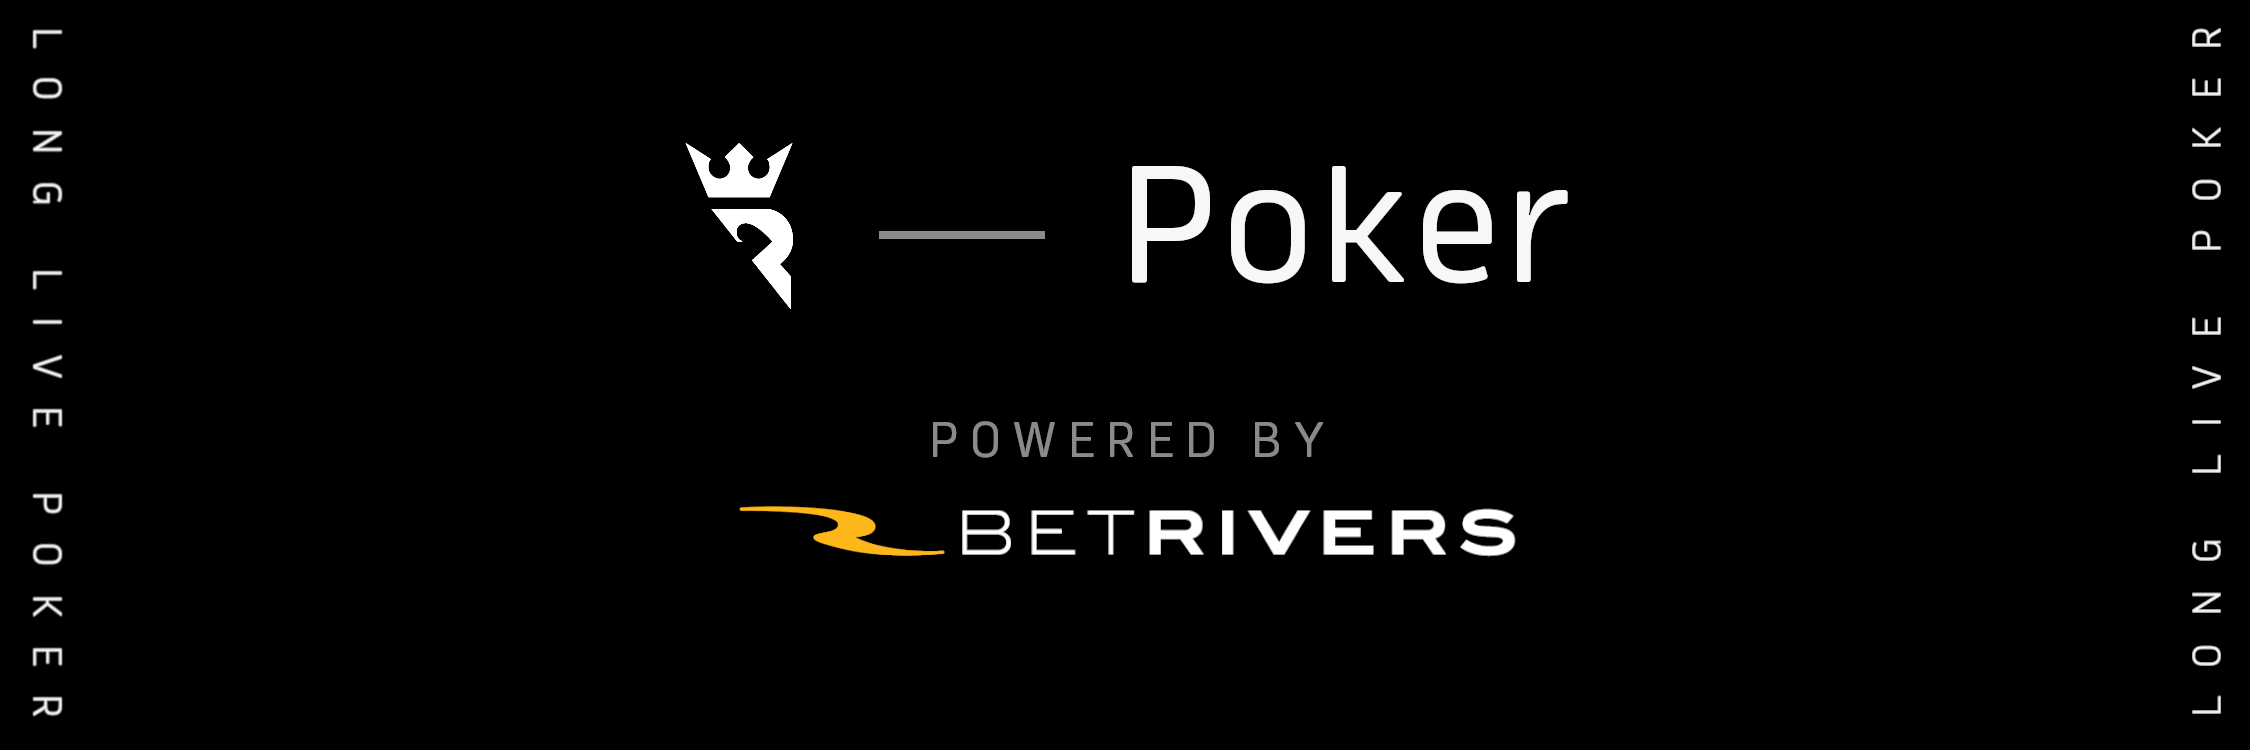 epiction of Run it Once Poker, Powered by BetRivers Logo, recreated by the pokerfuse design department